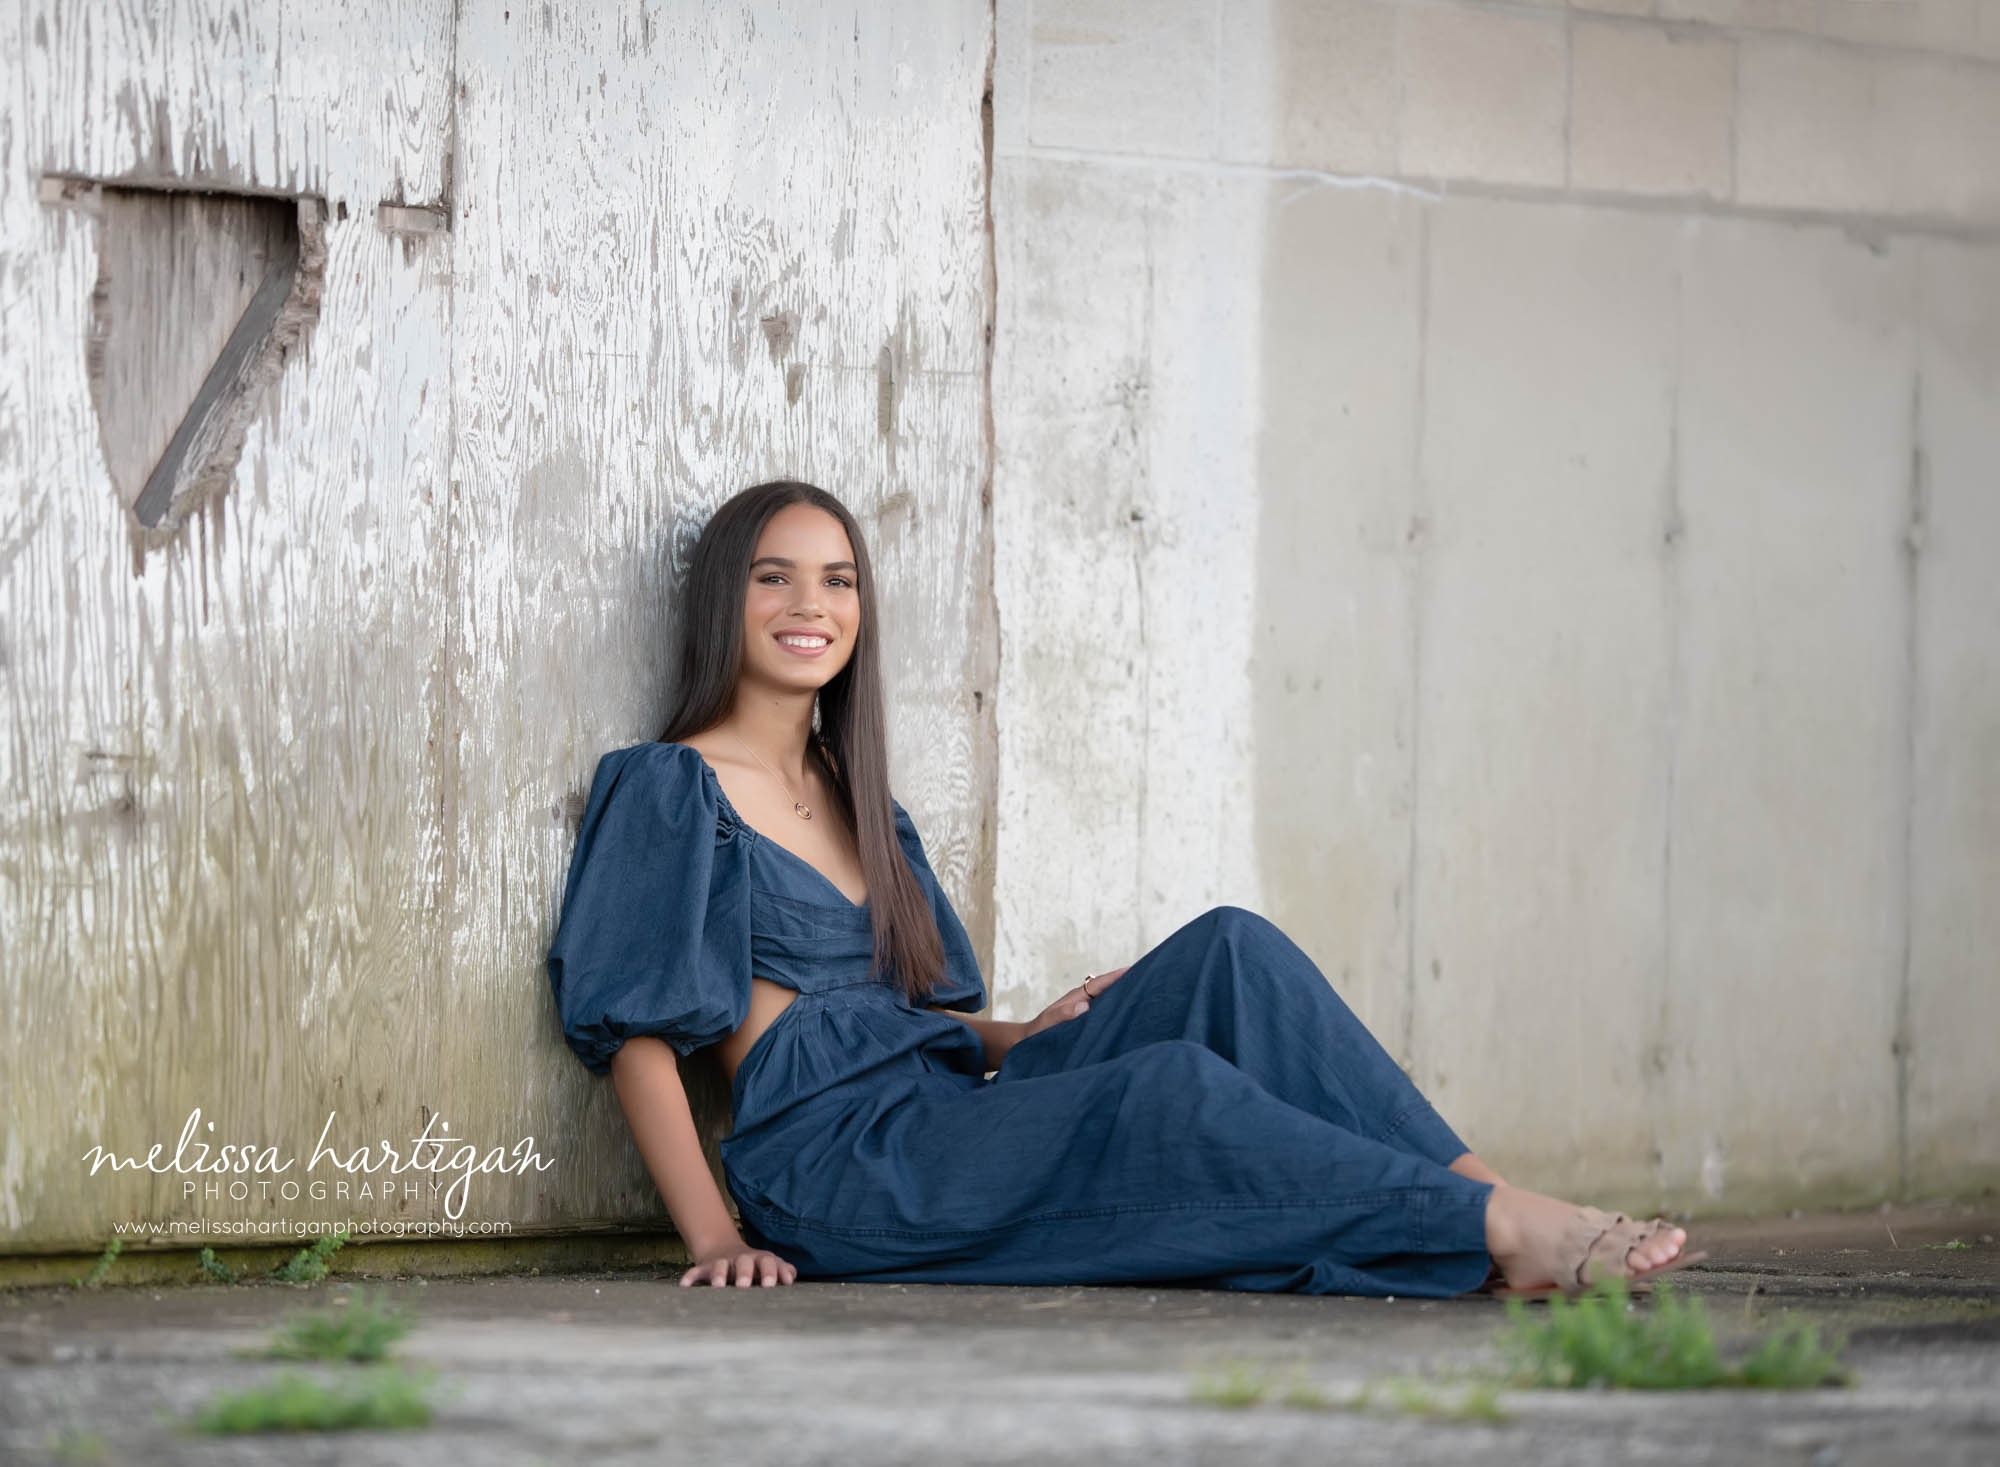 girl wearing blue outfit sitting leaning against wall gradation portrait photoshoot